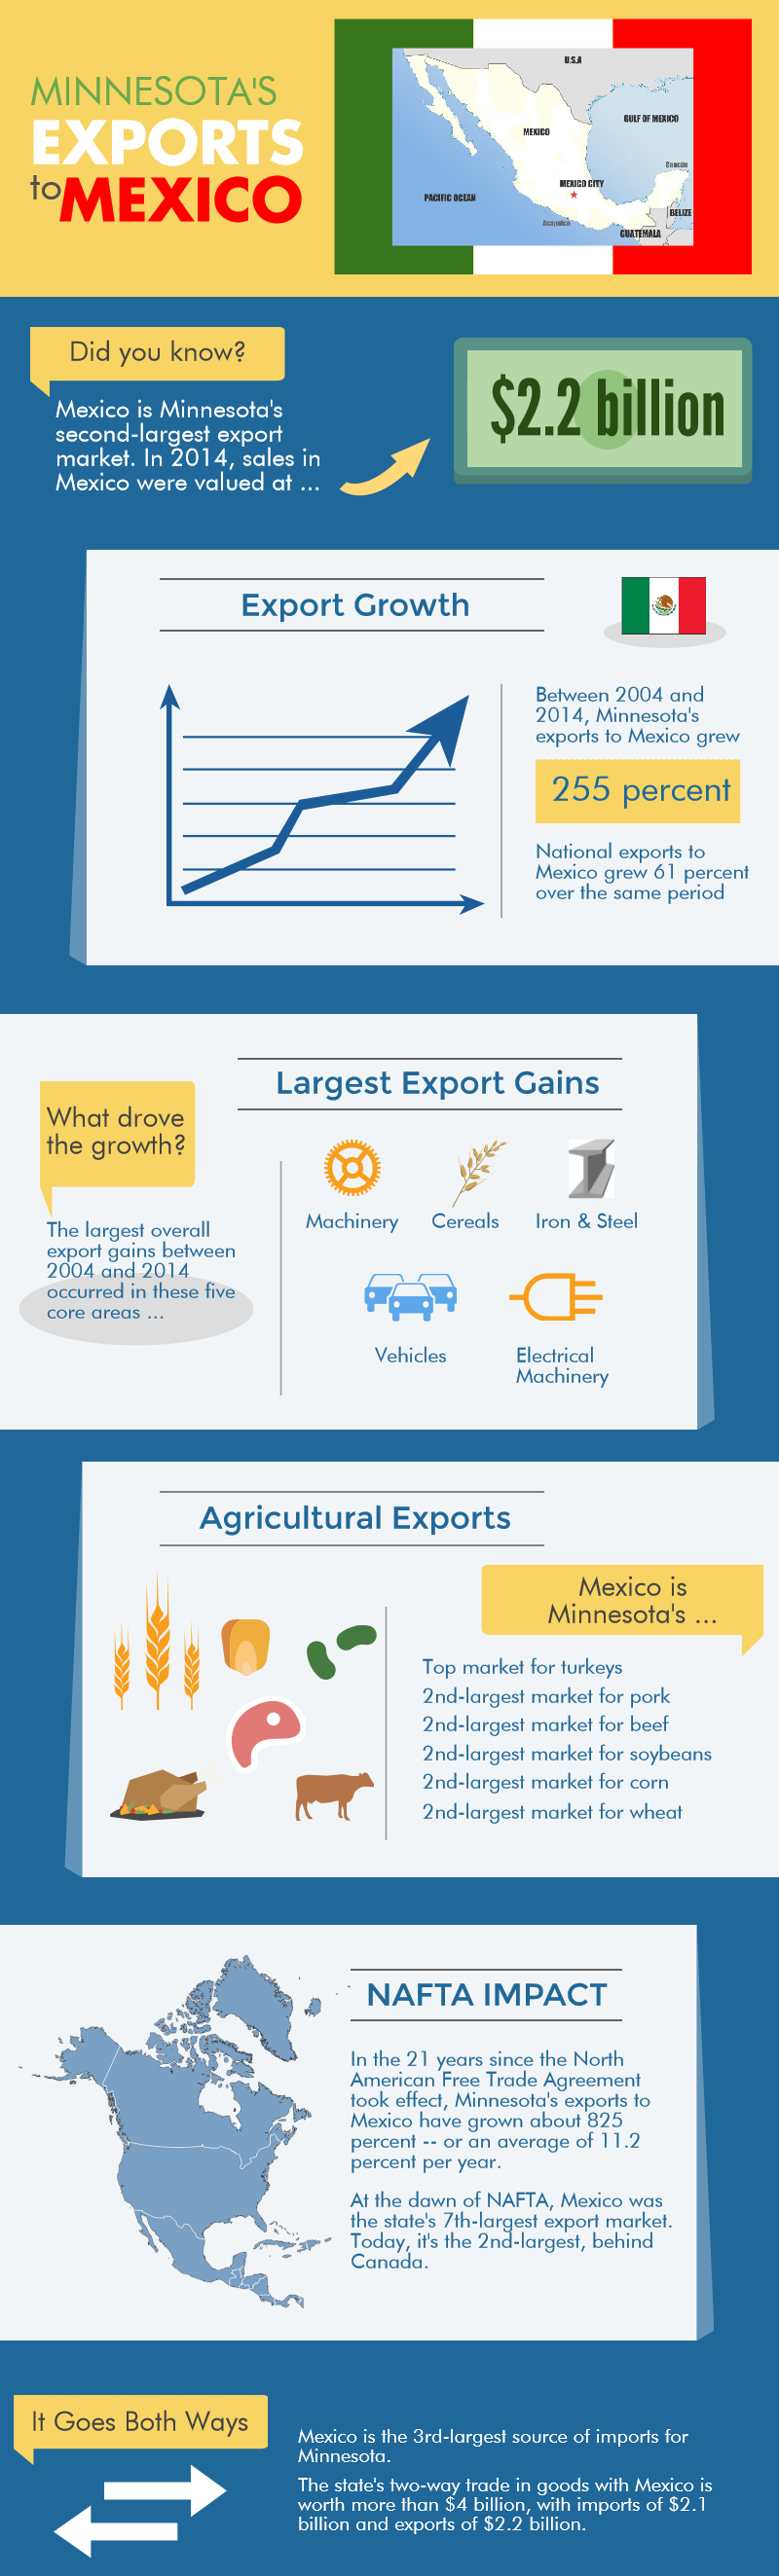 exports-to-mexico